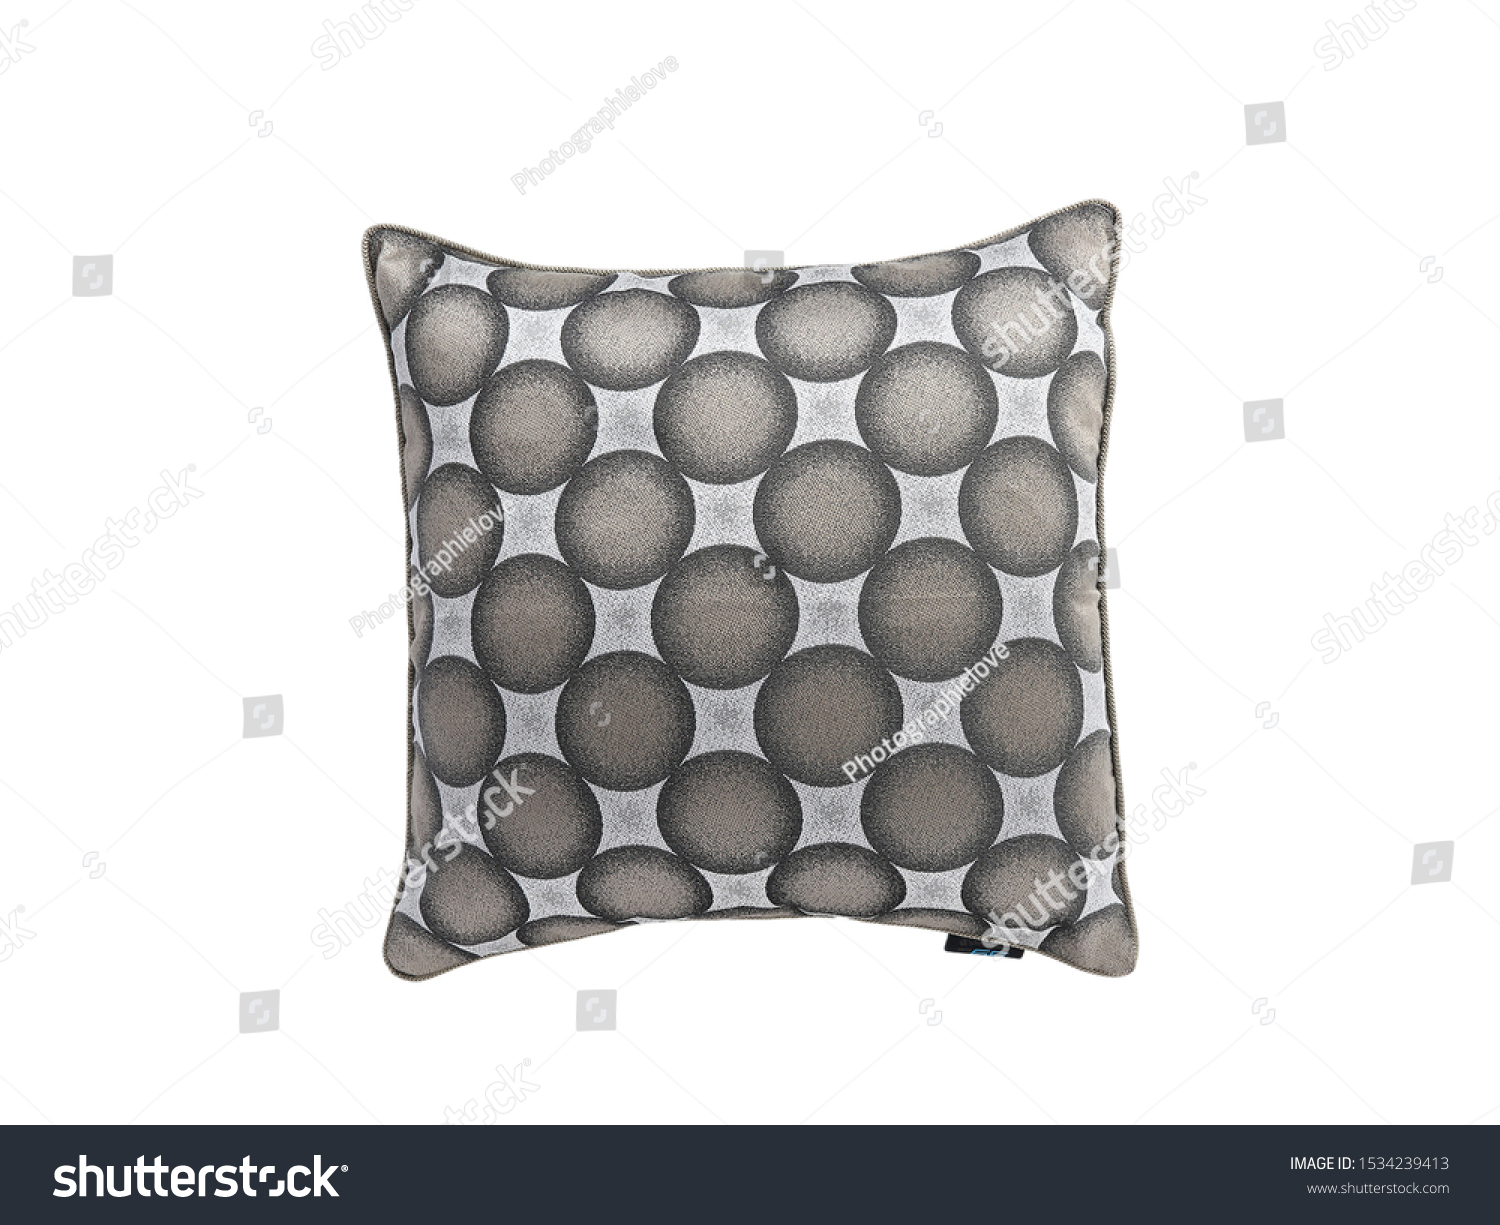 Back support Grey pillows for luxury sofa in living room, interior design #1534239413